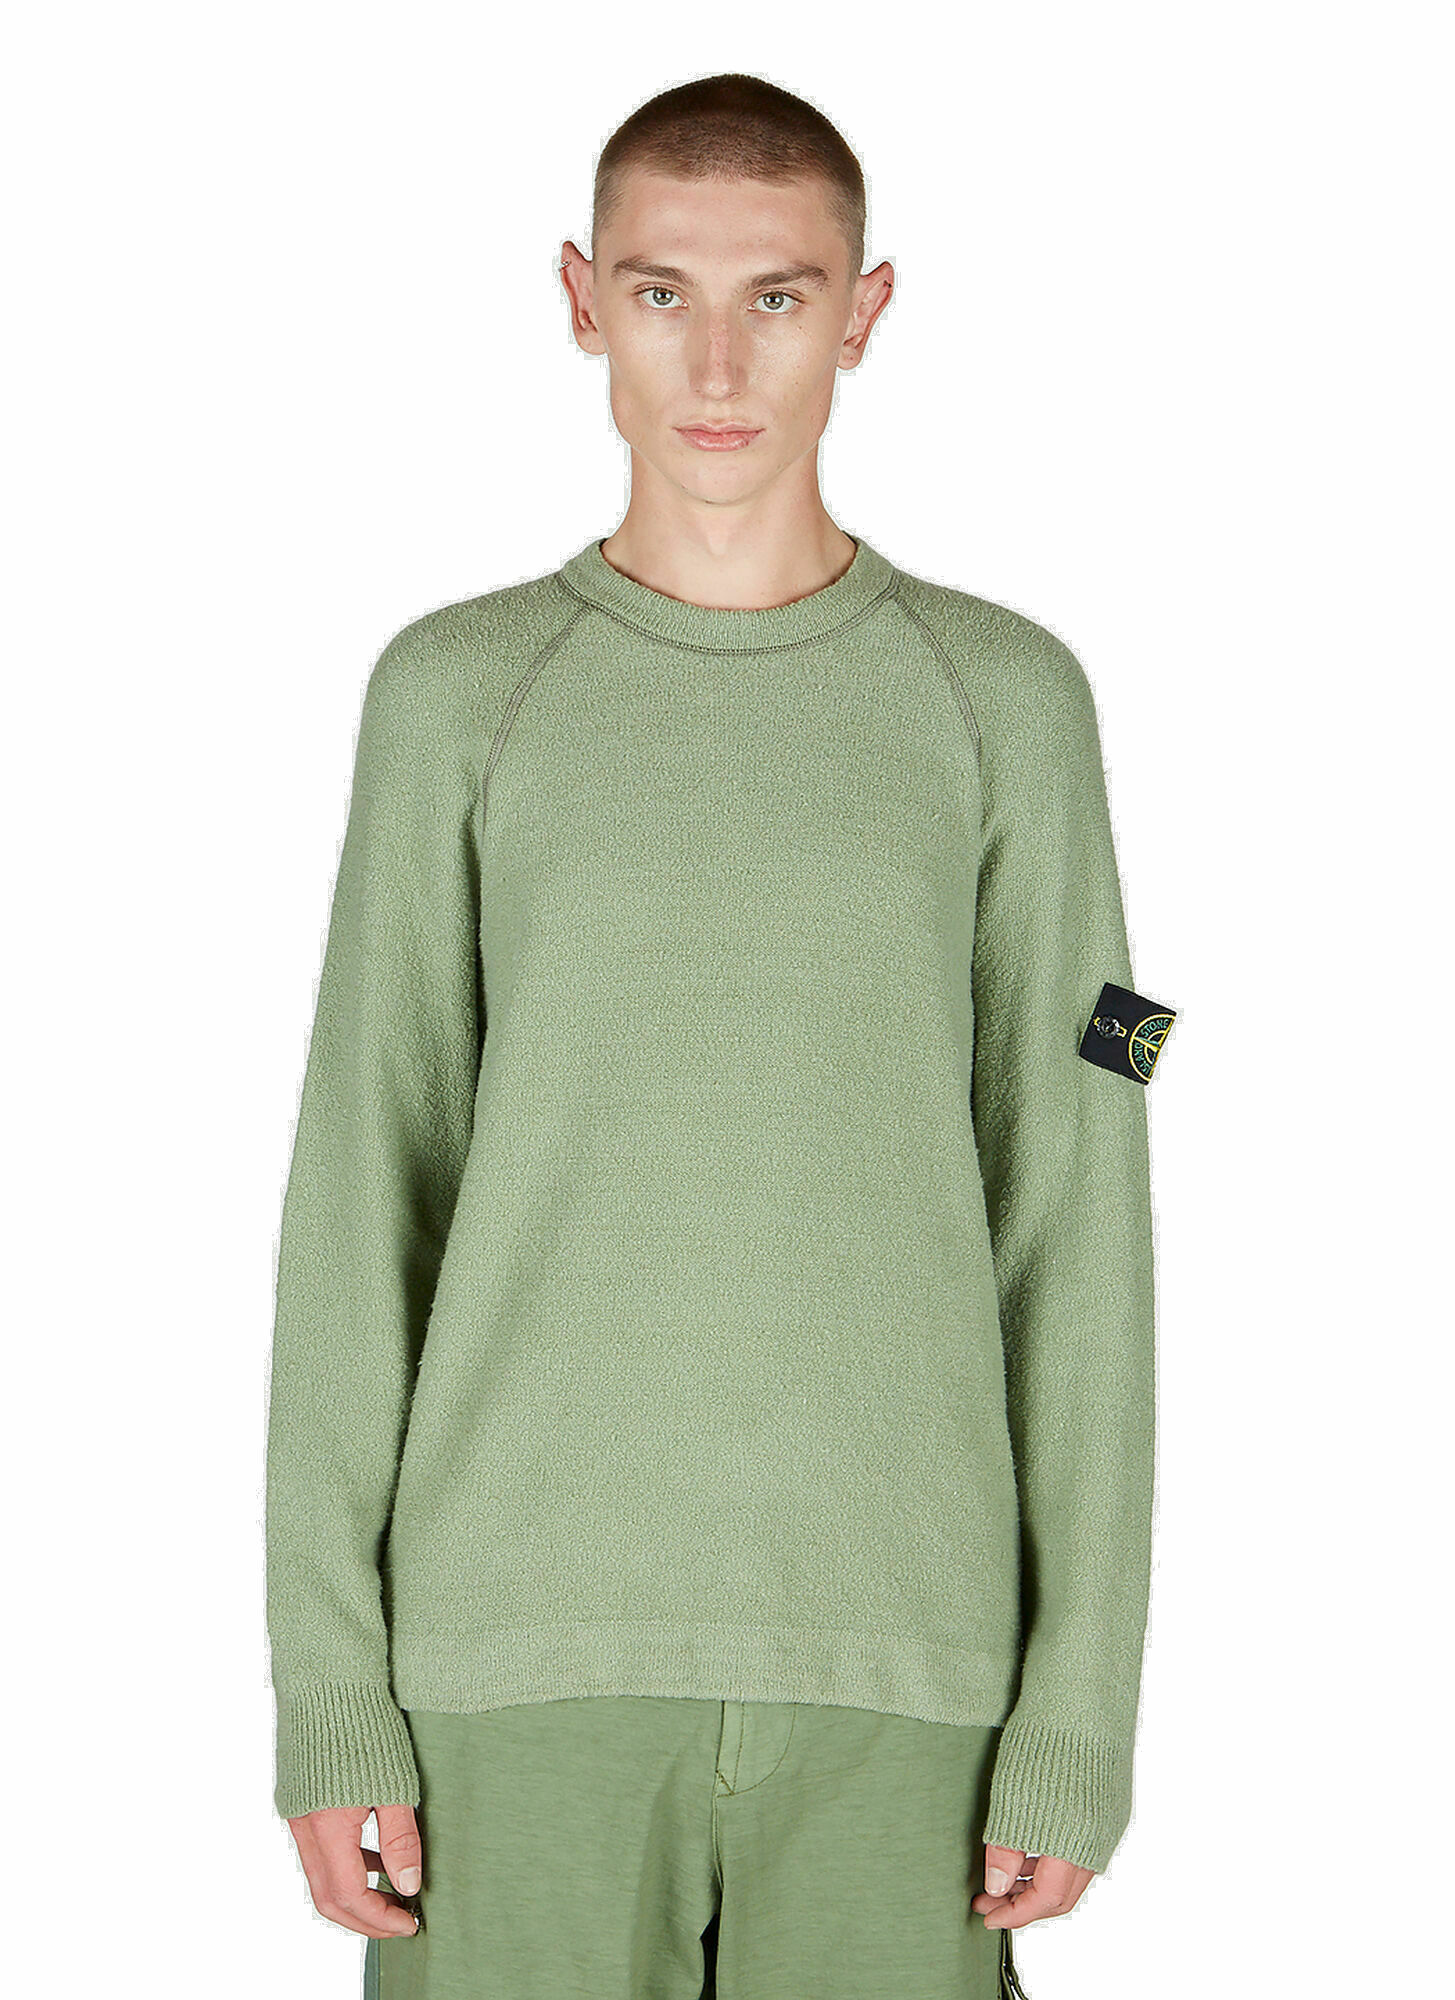 Photo: Stone Island - Compass Patch Sweater in Green